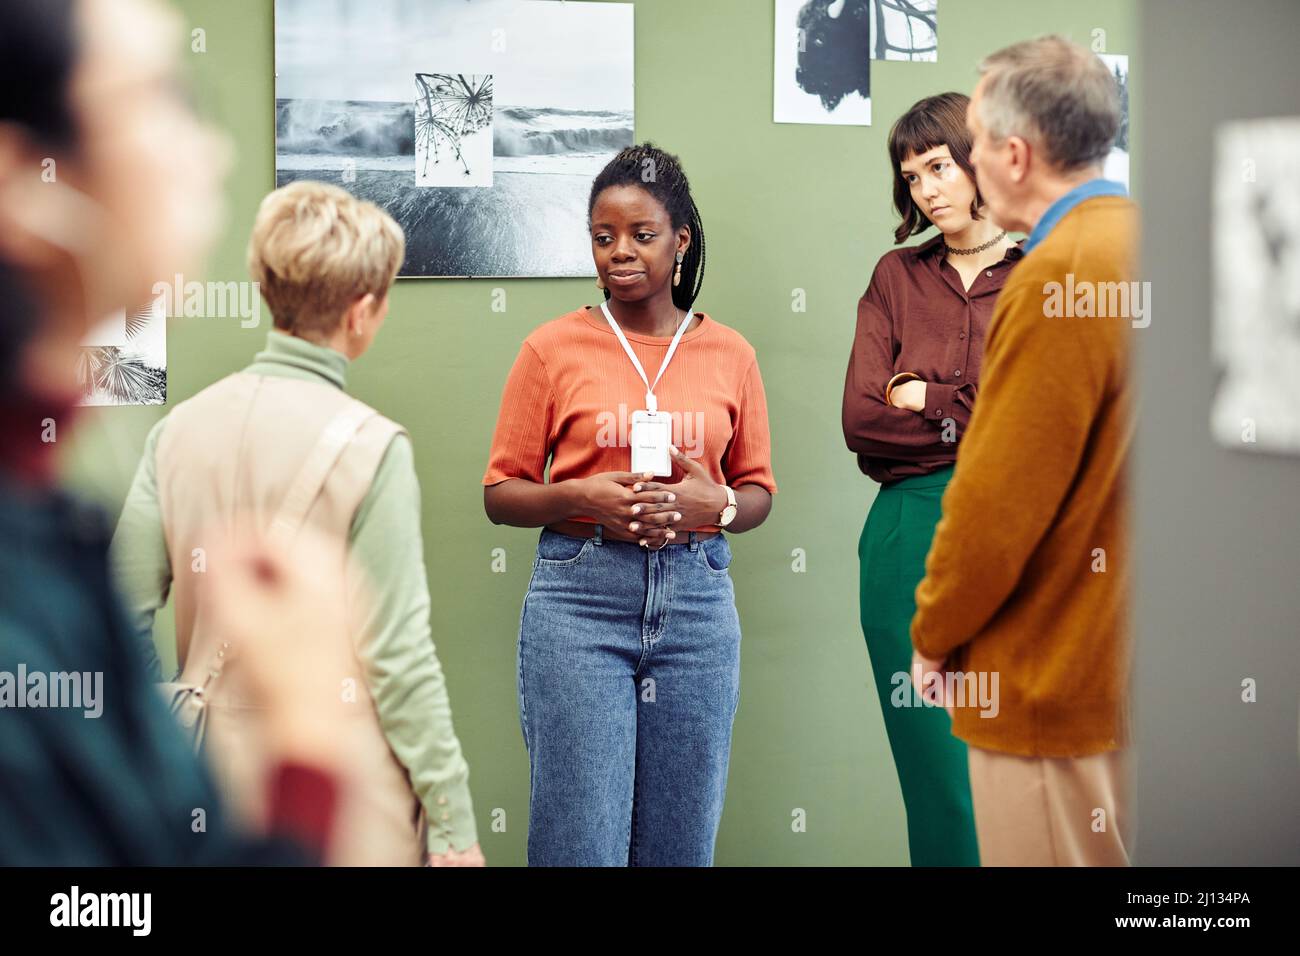 Portrait of young African American gallery worker standing in front of visitors discussing black and white photography Stock Photo